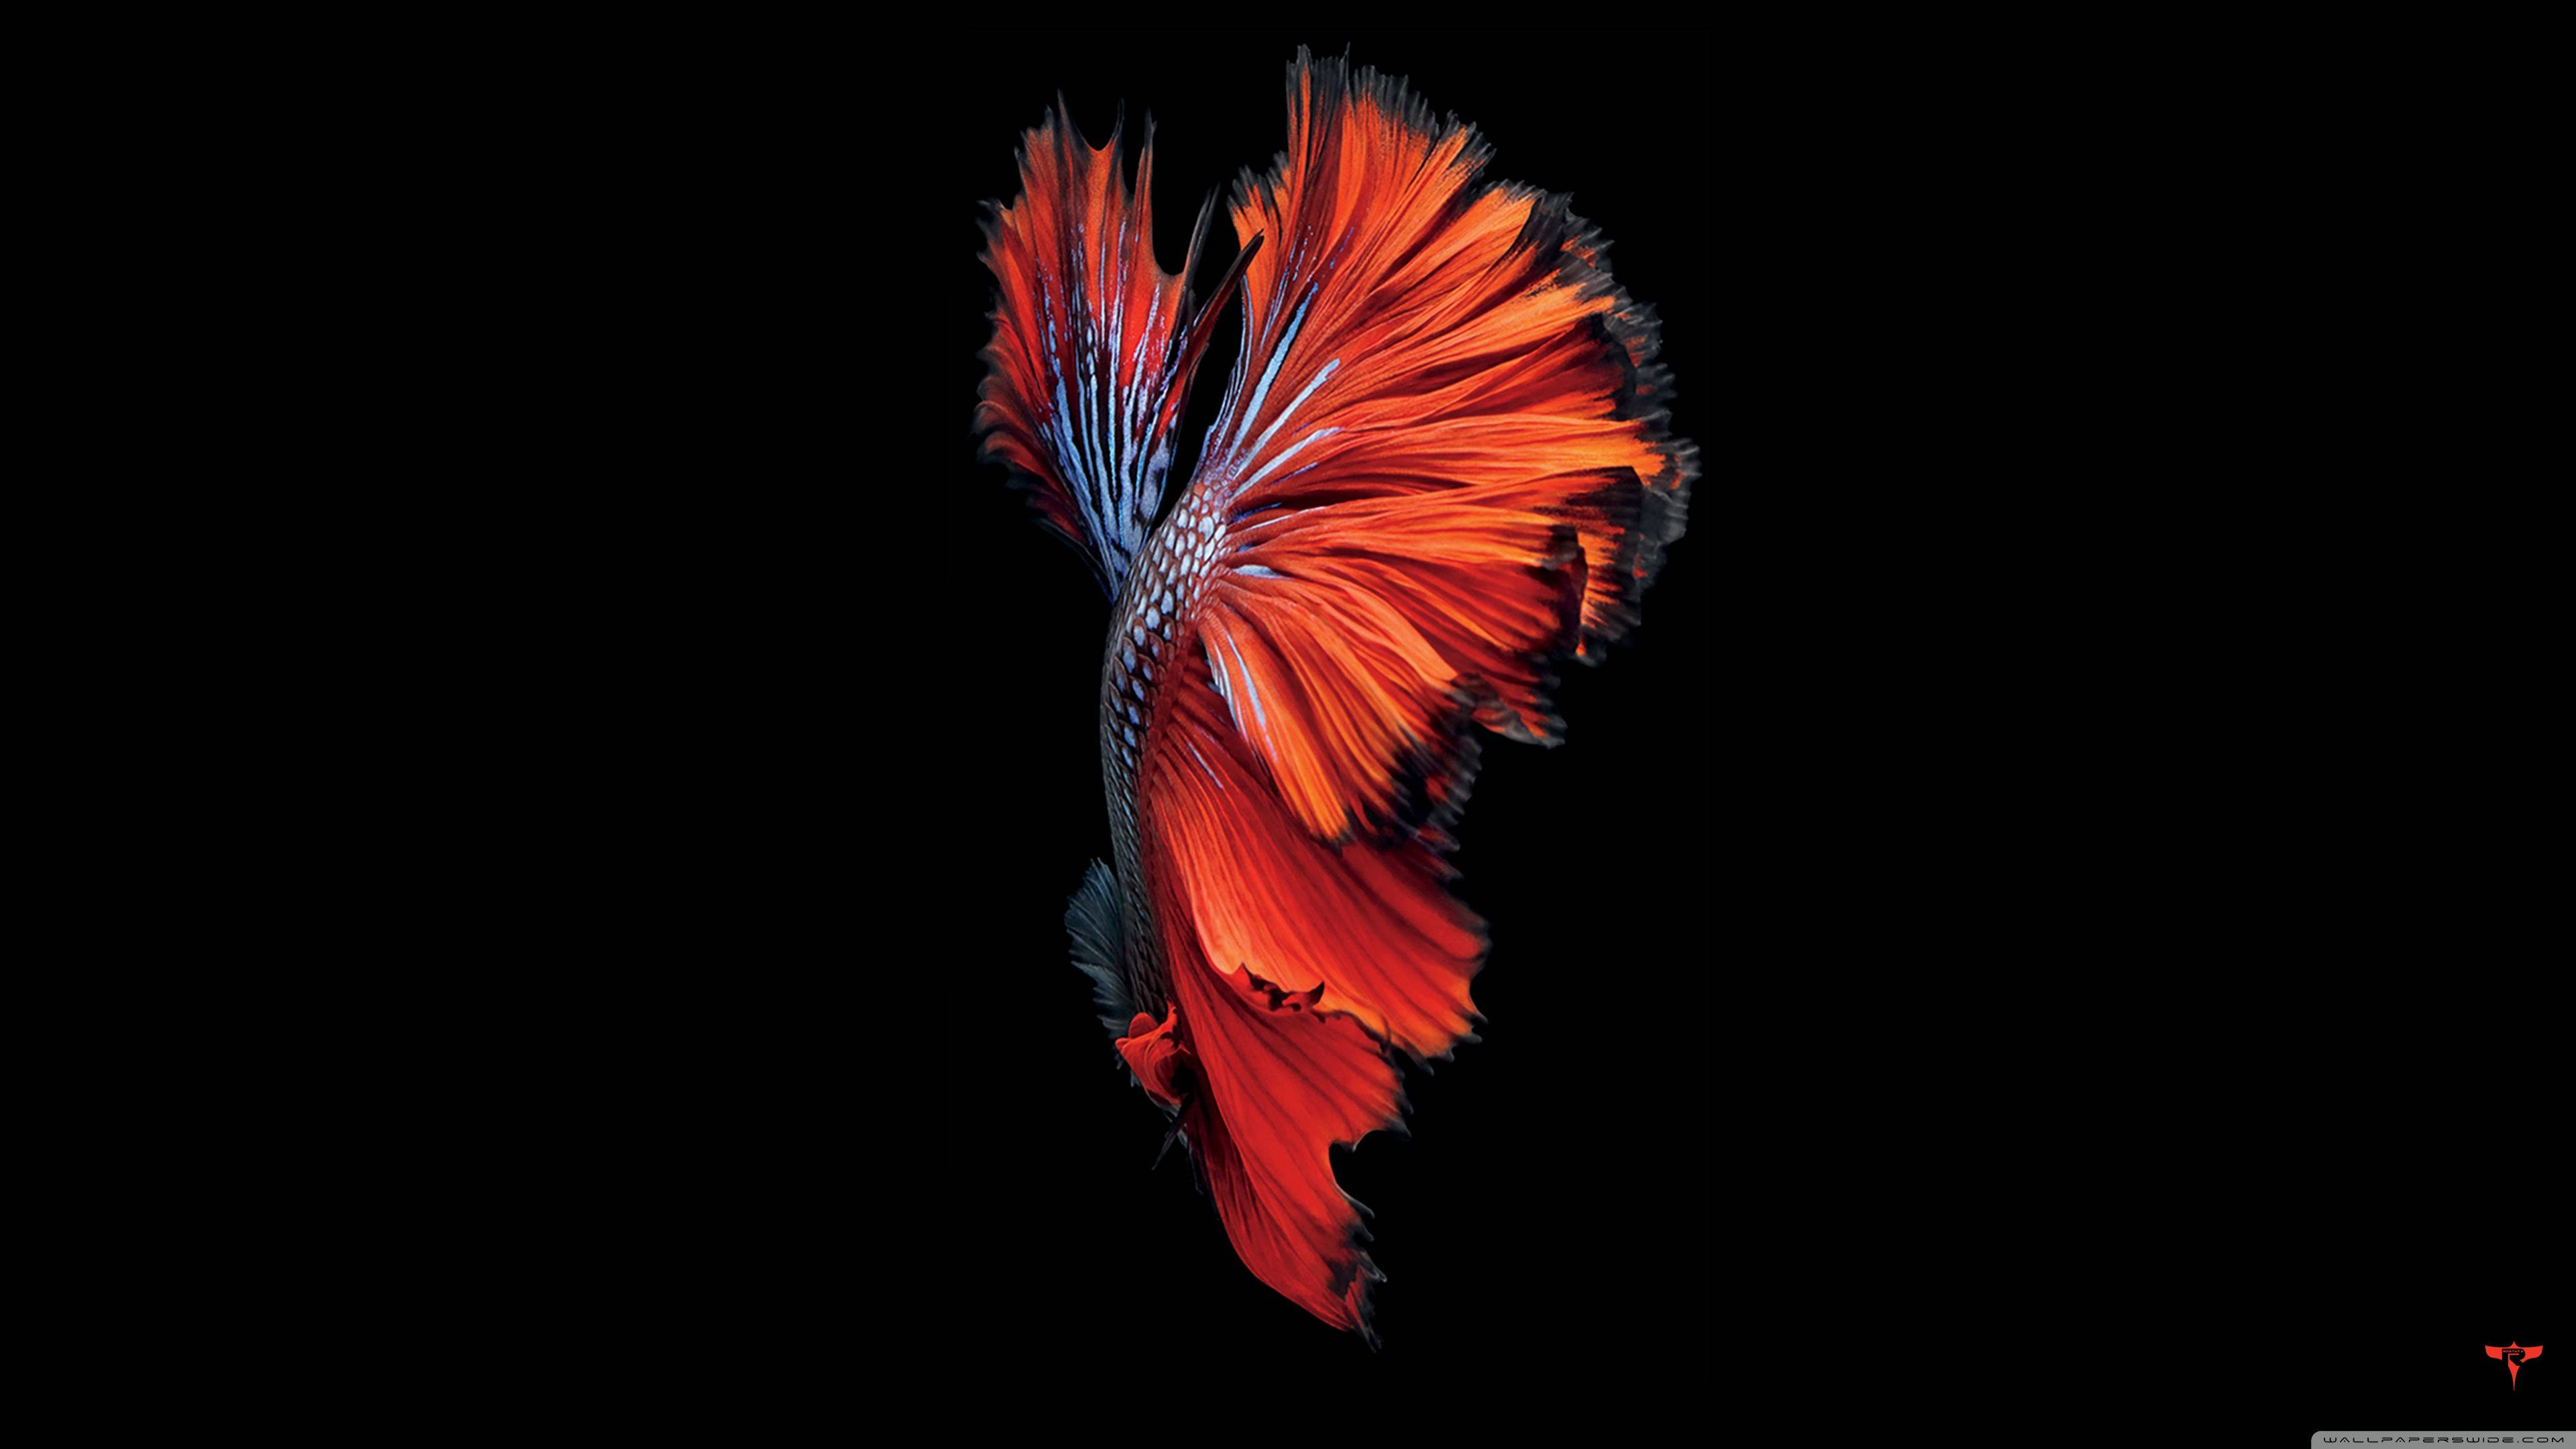 Download A Vibrant Red Fish Swimming Through A Crystal Clear Ocean. Wallpaper